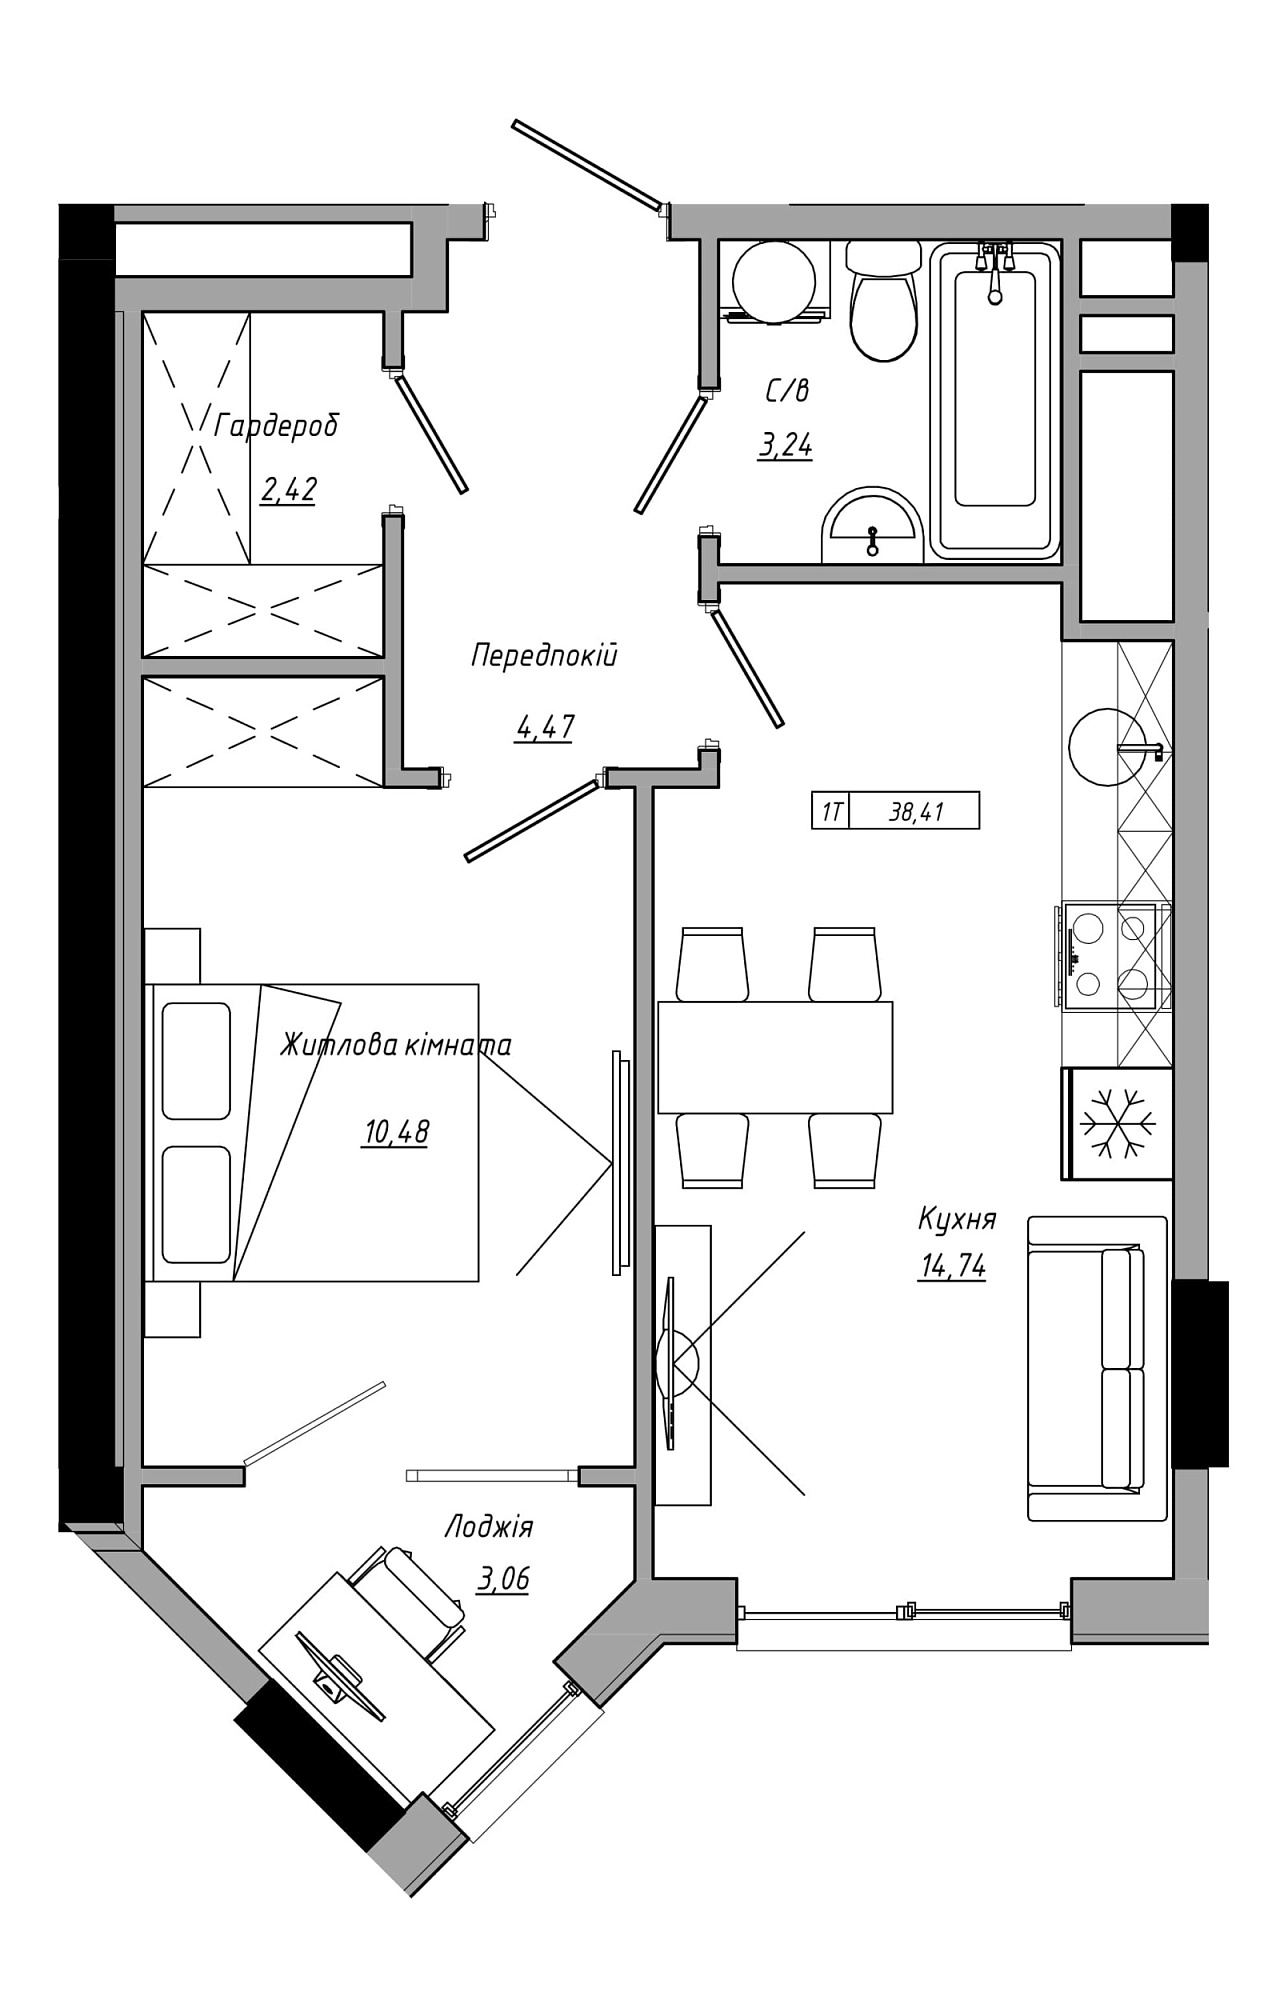 Planning 1-rm flats area 38.41m2, AB-21-13/00122.